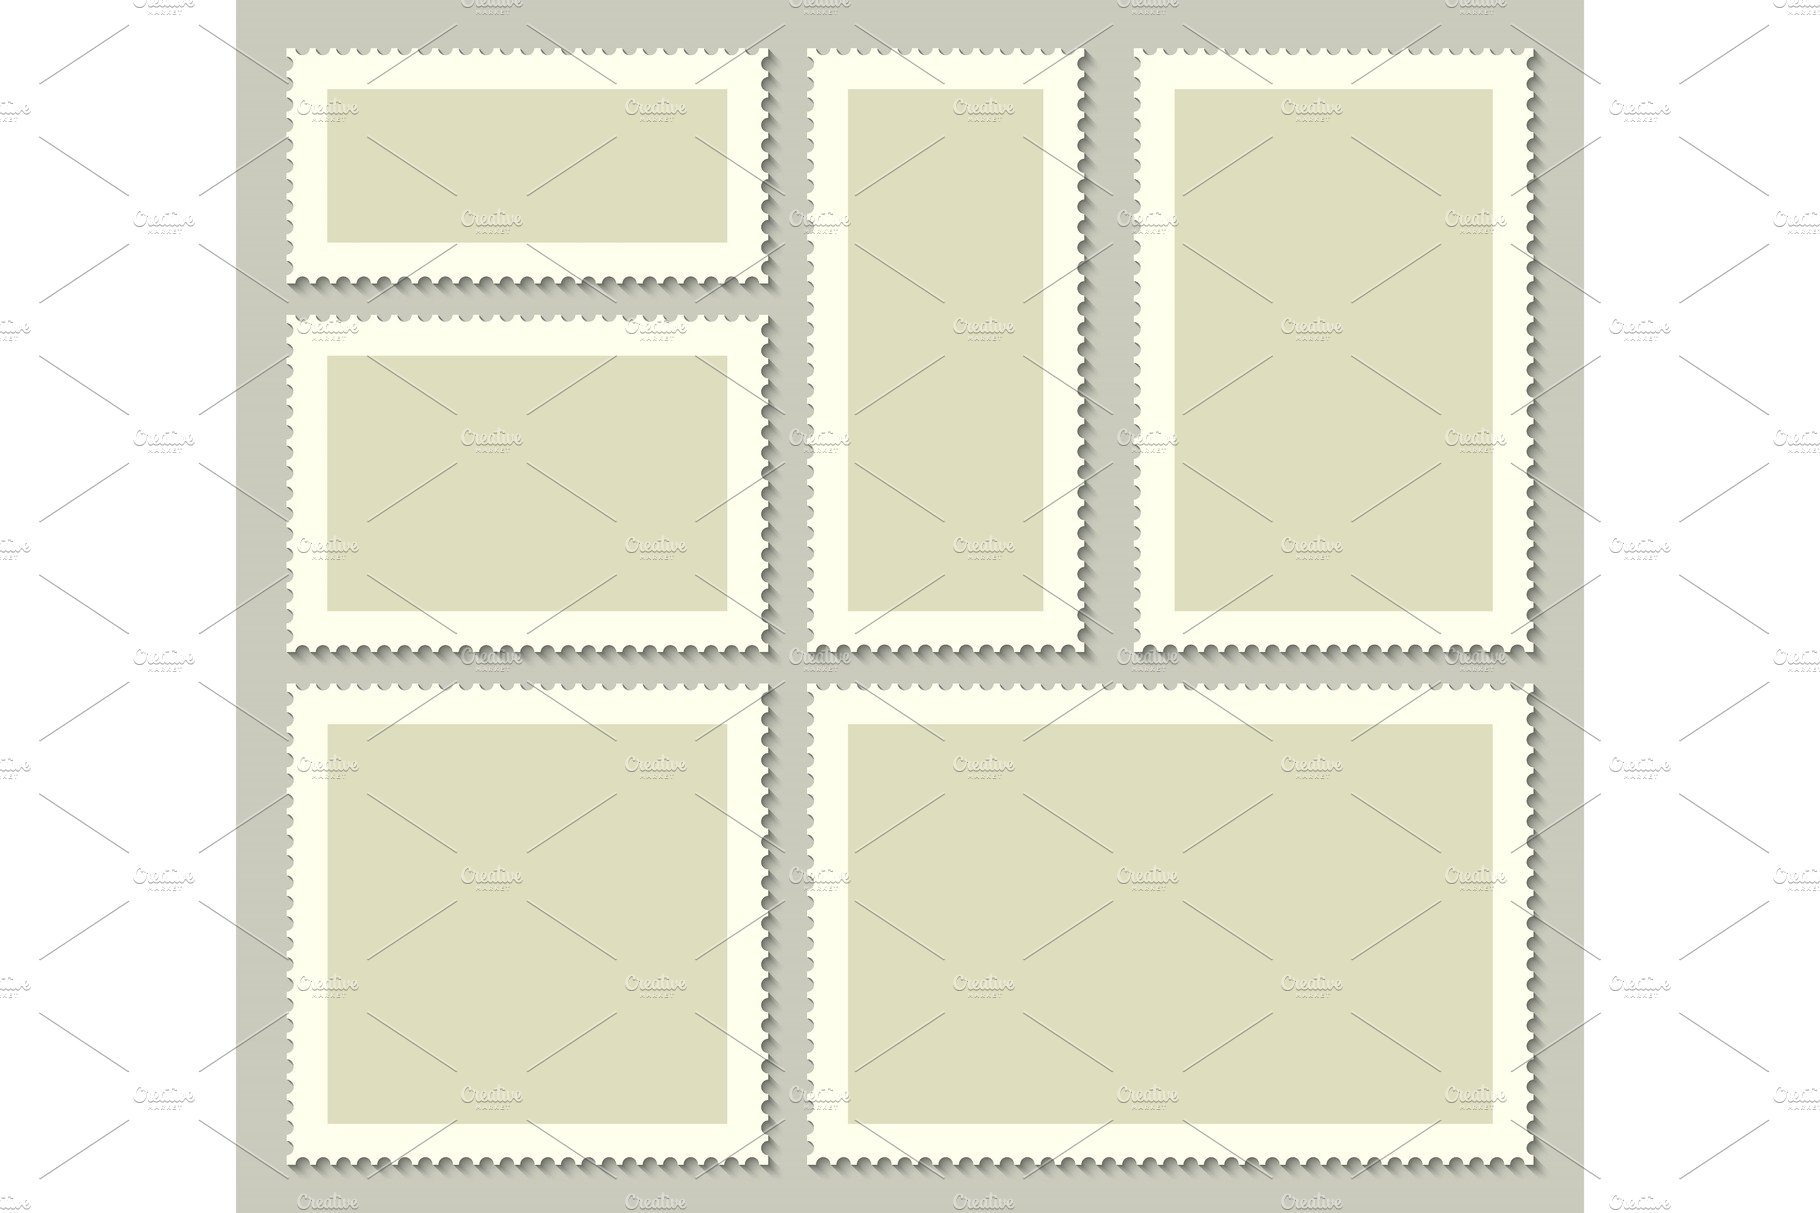 Blank postage stamps, post card. cover image.